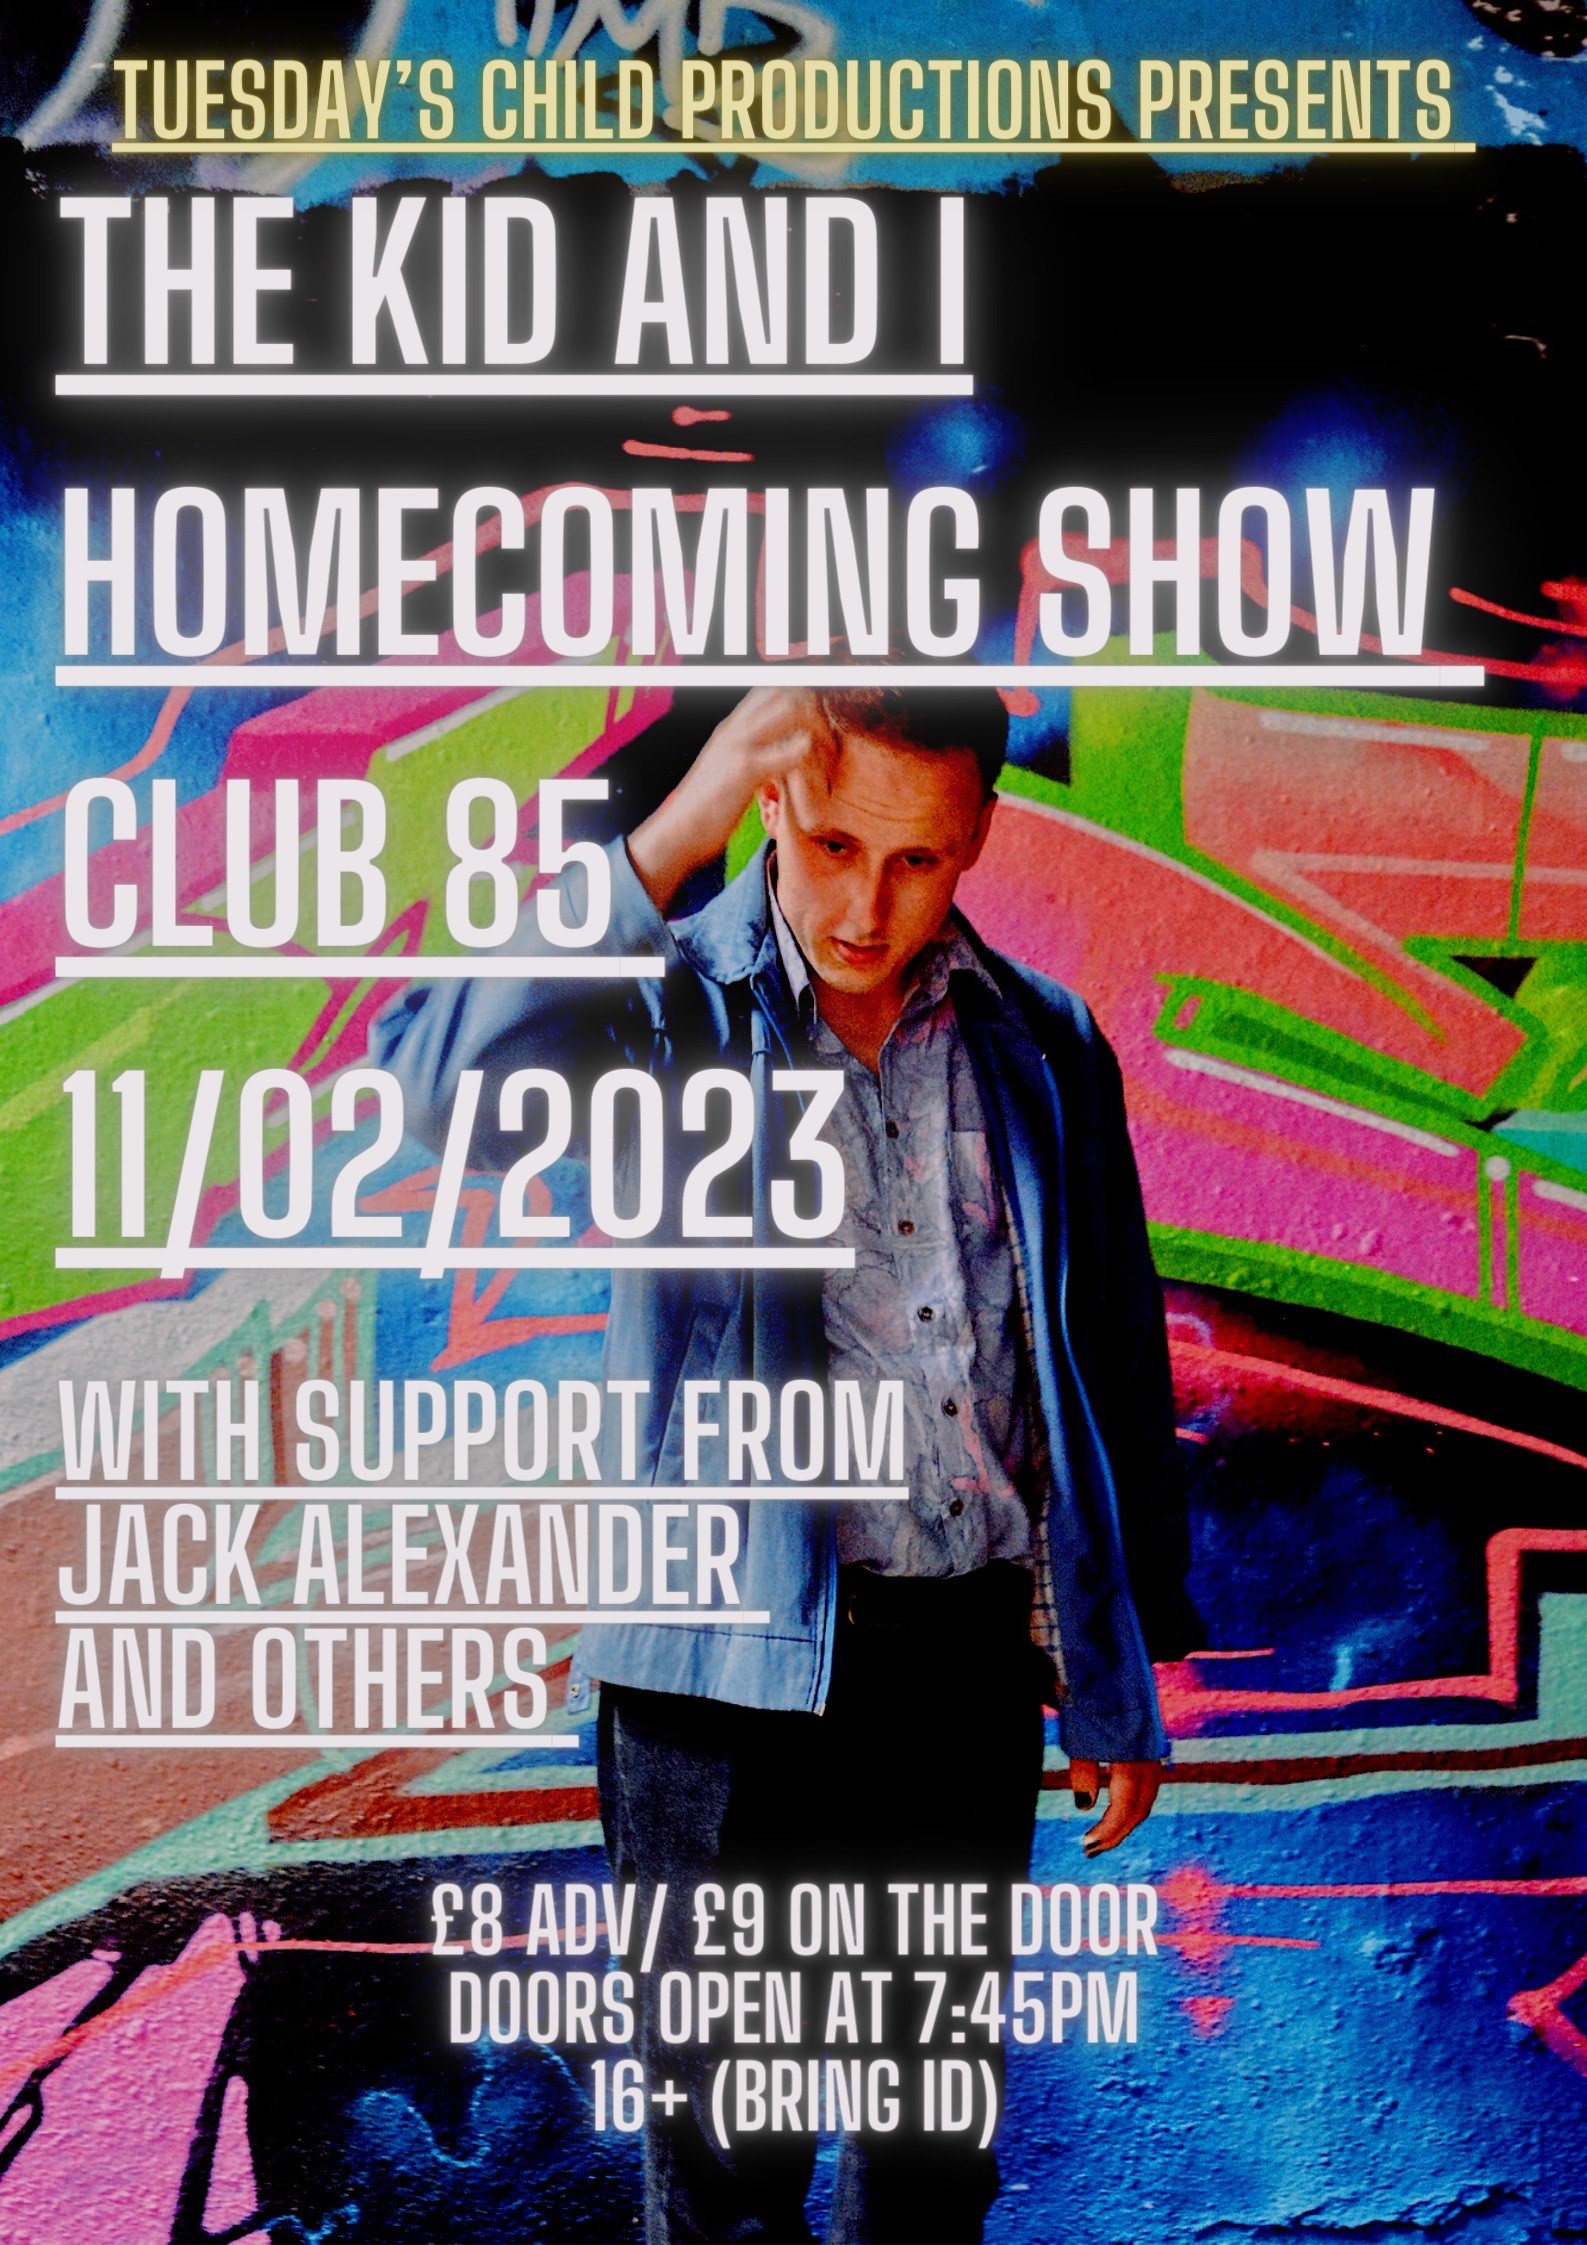 The Kid and I homecoming show – Club 85